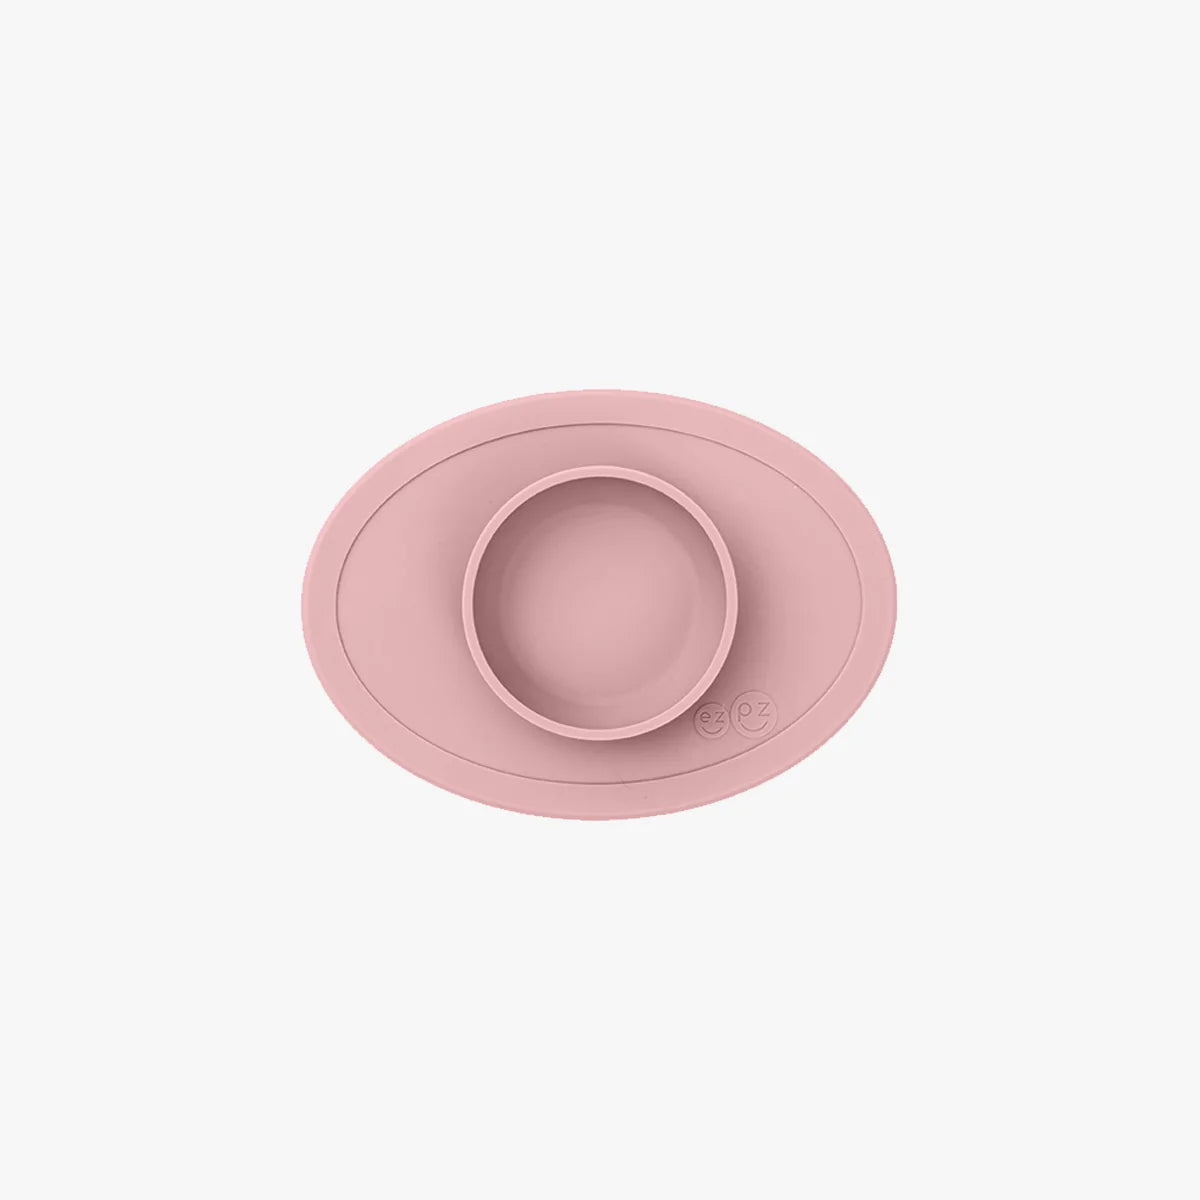 The Tiny Bowl in Blush